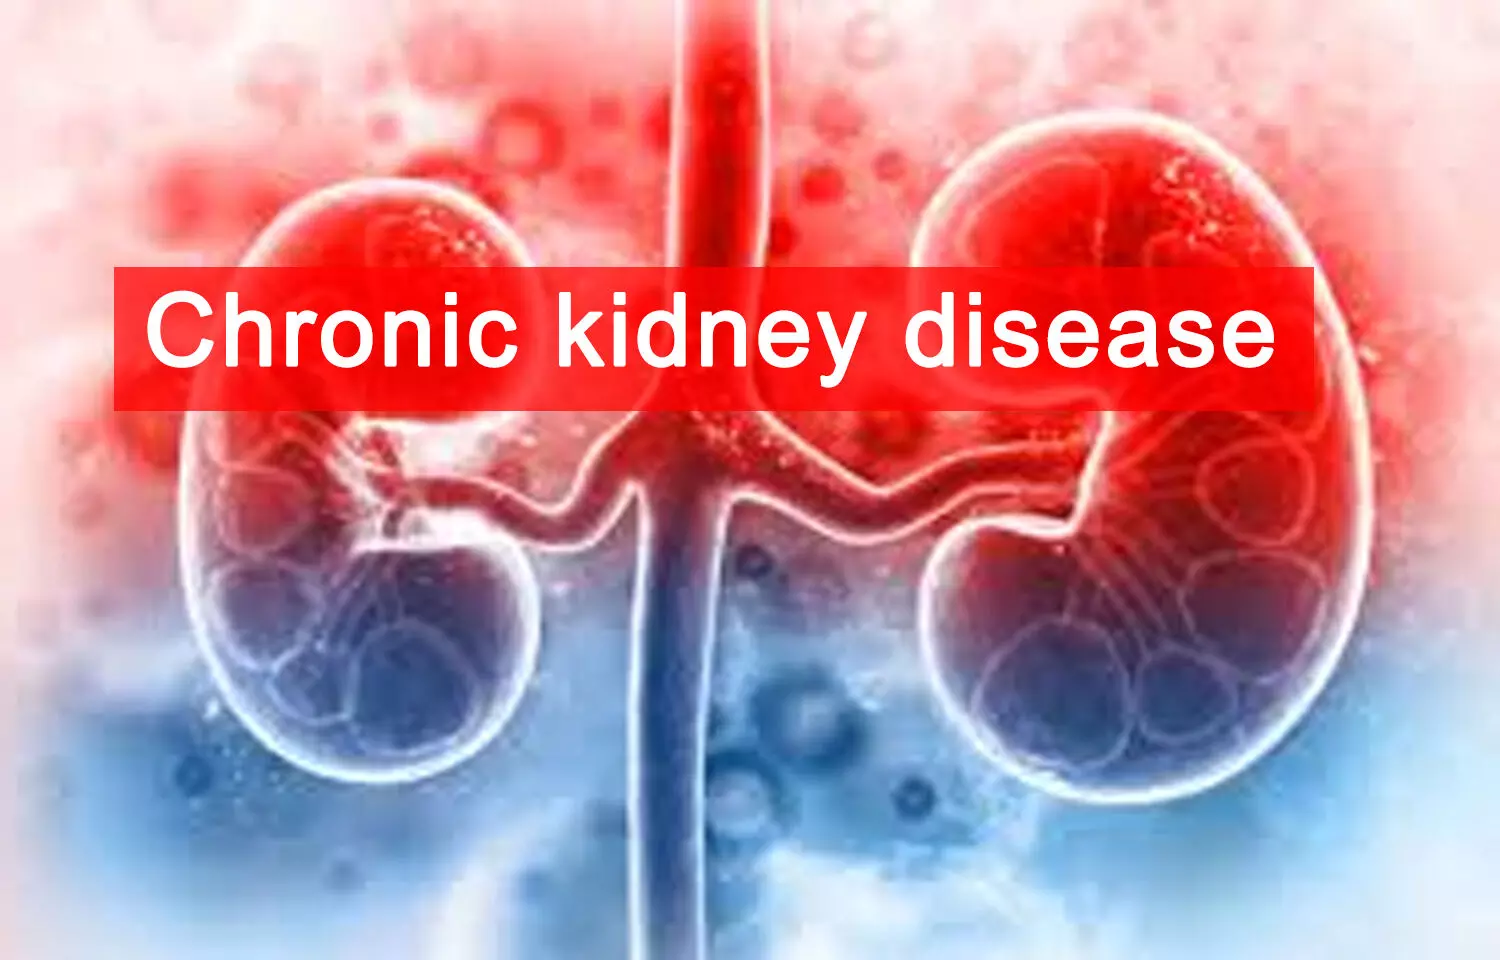 Circulating proteins protective against kidney failure in diabetics: Study